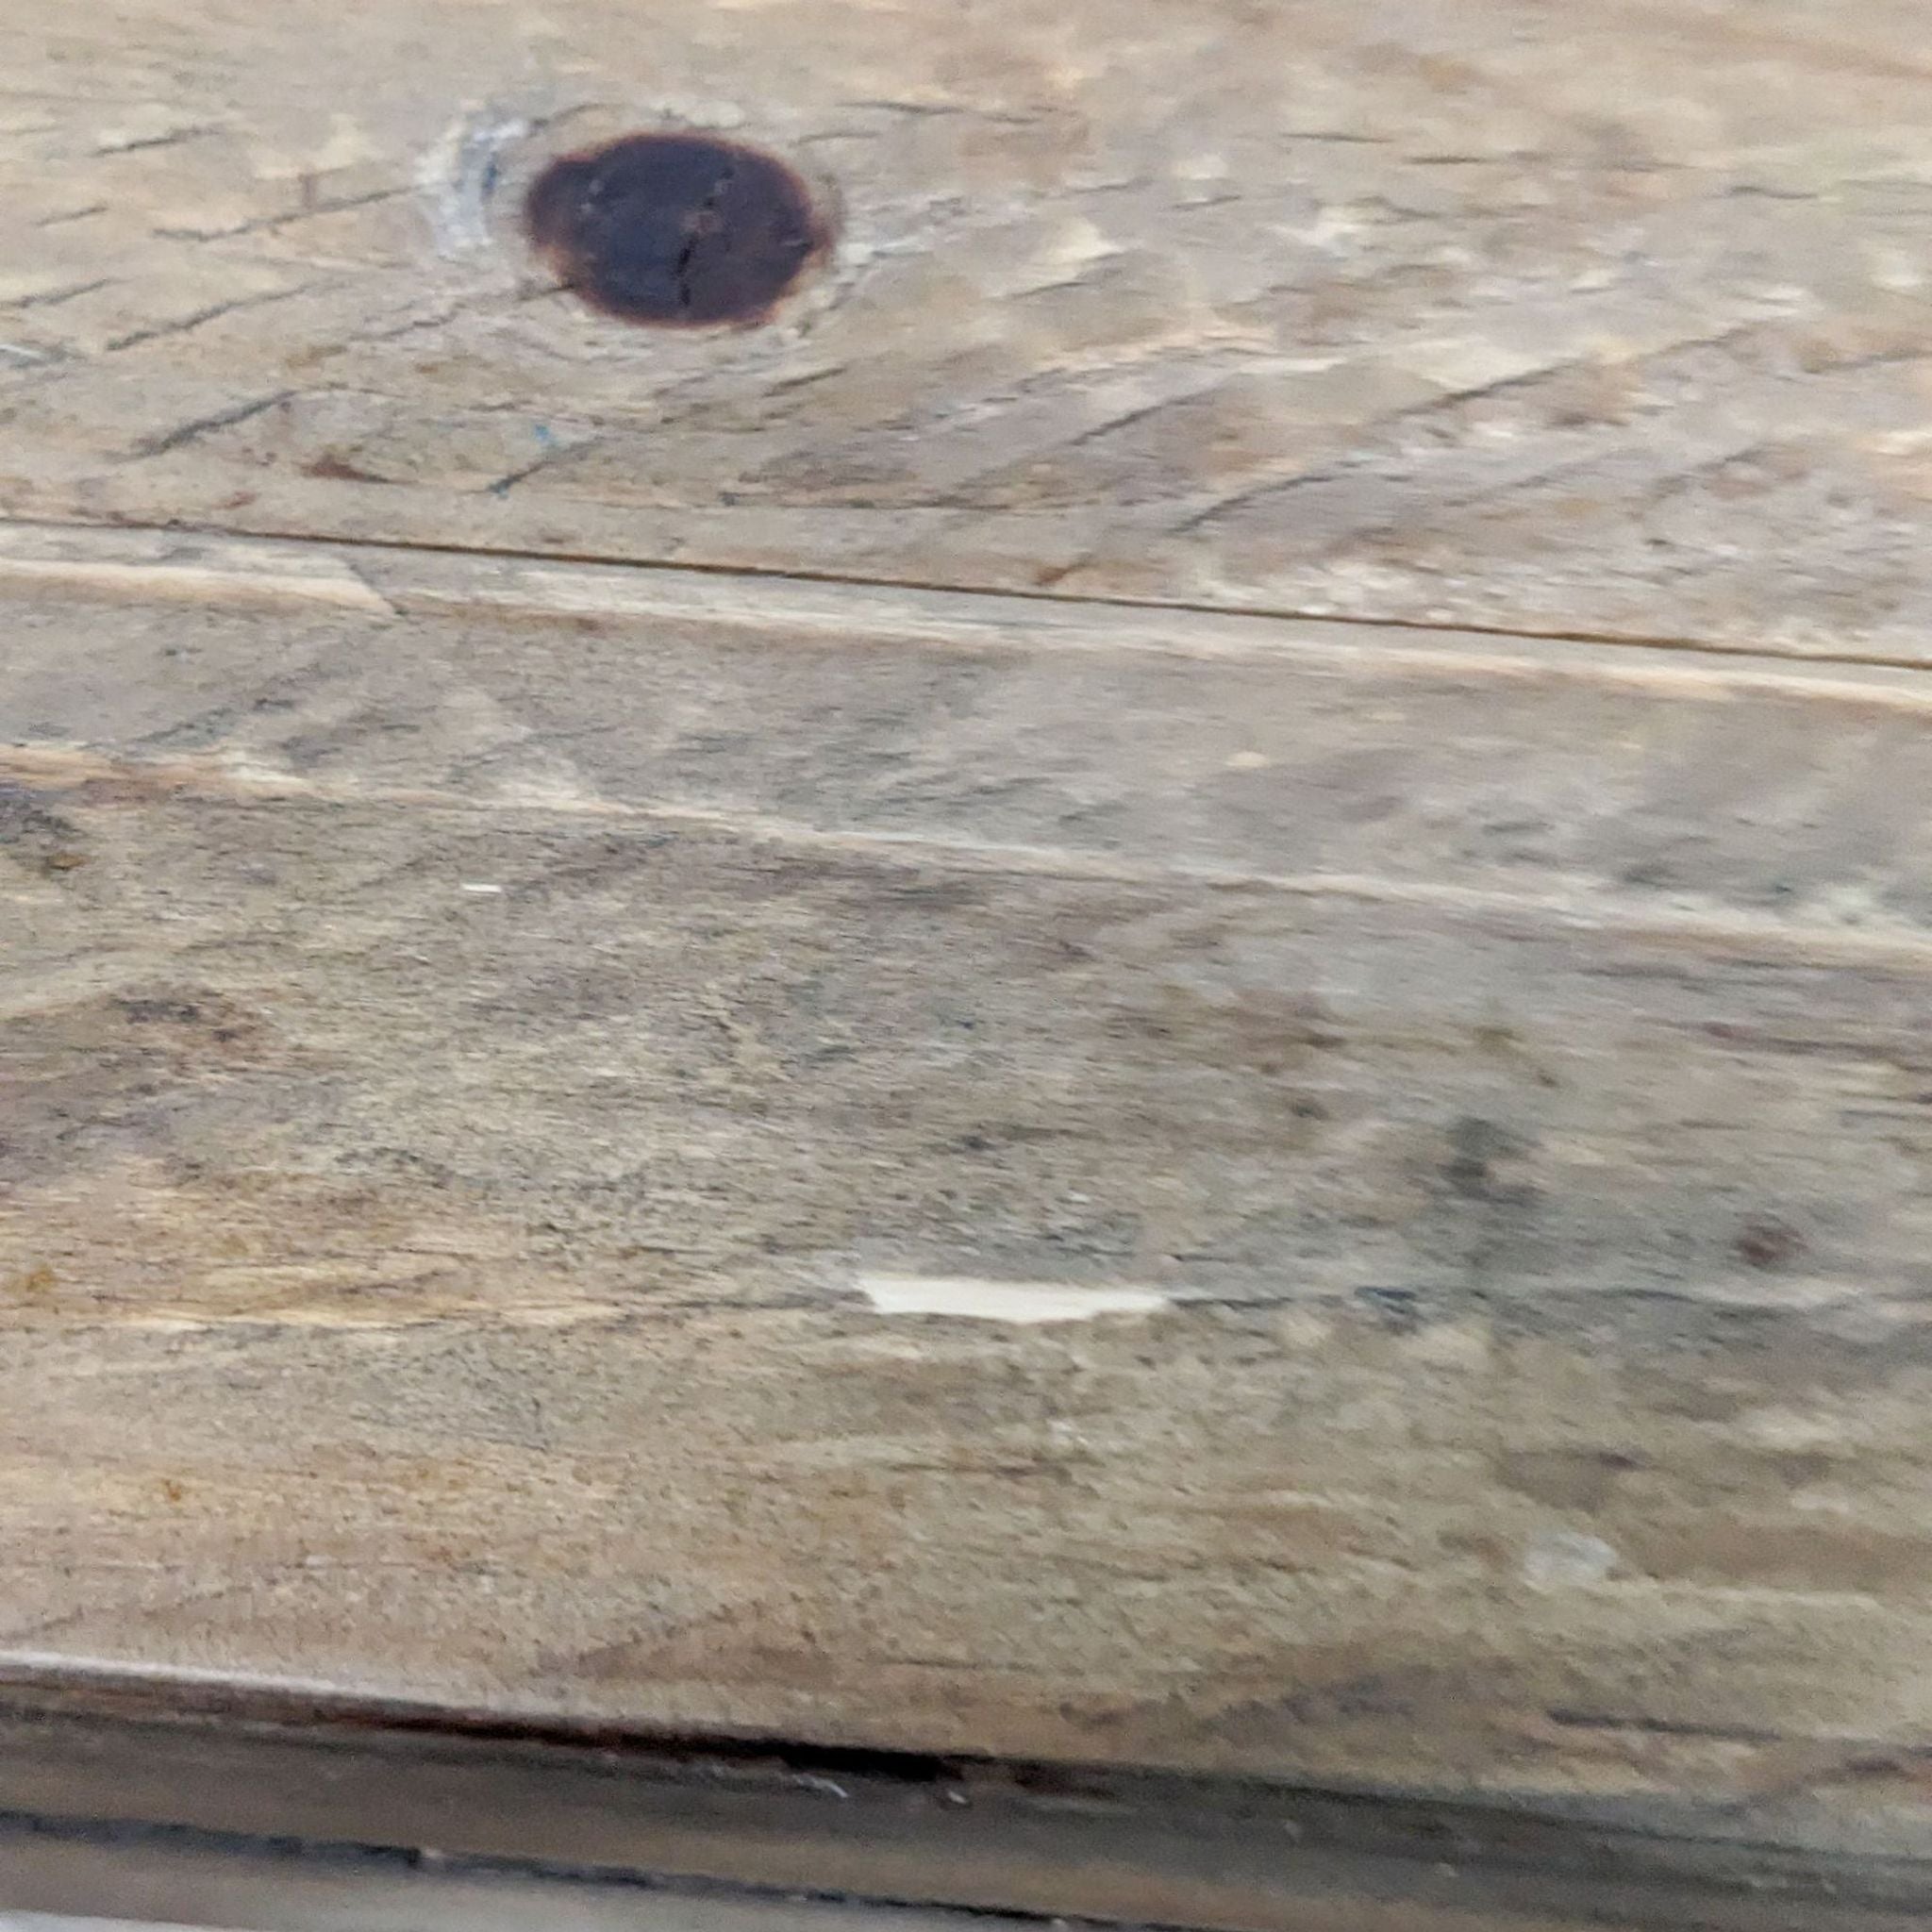 Close-up of a Scandinavian Designs wooden table surface showing textured wood grain and a knot.